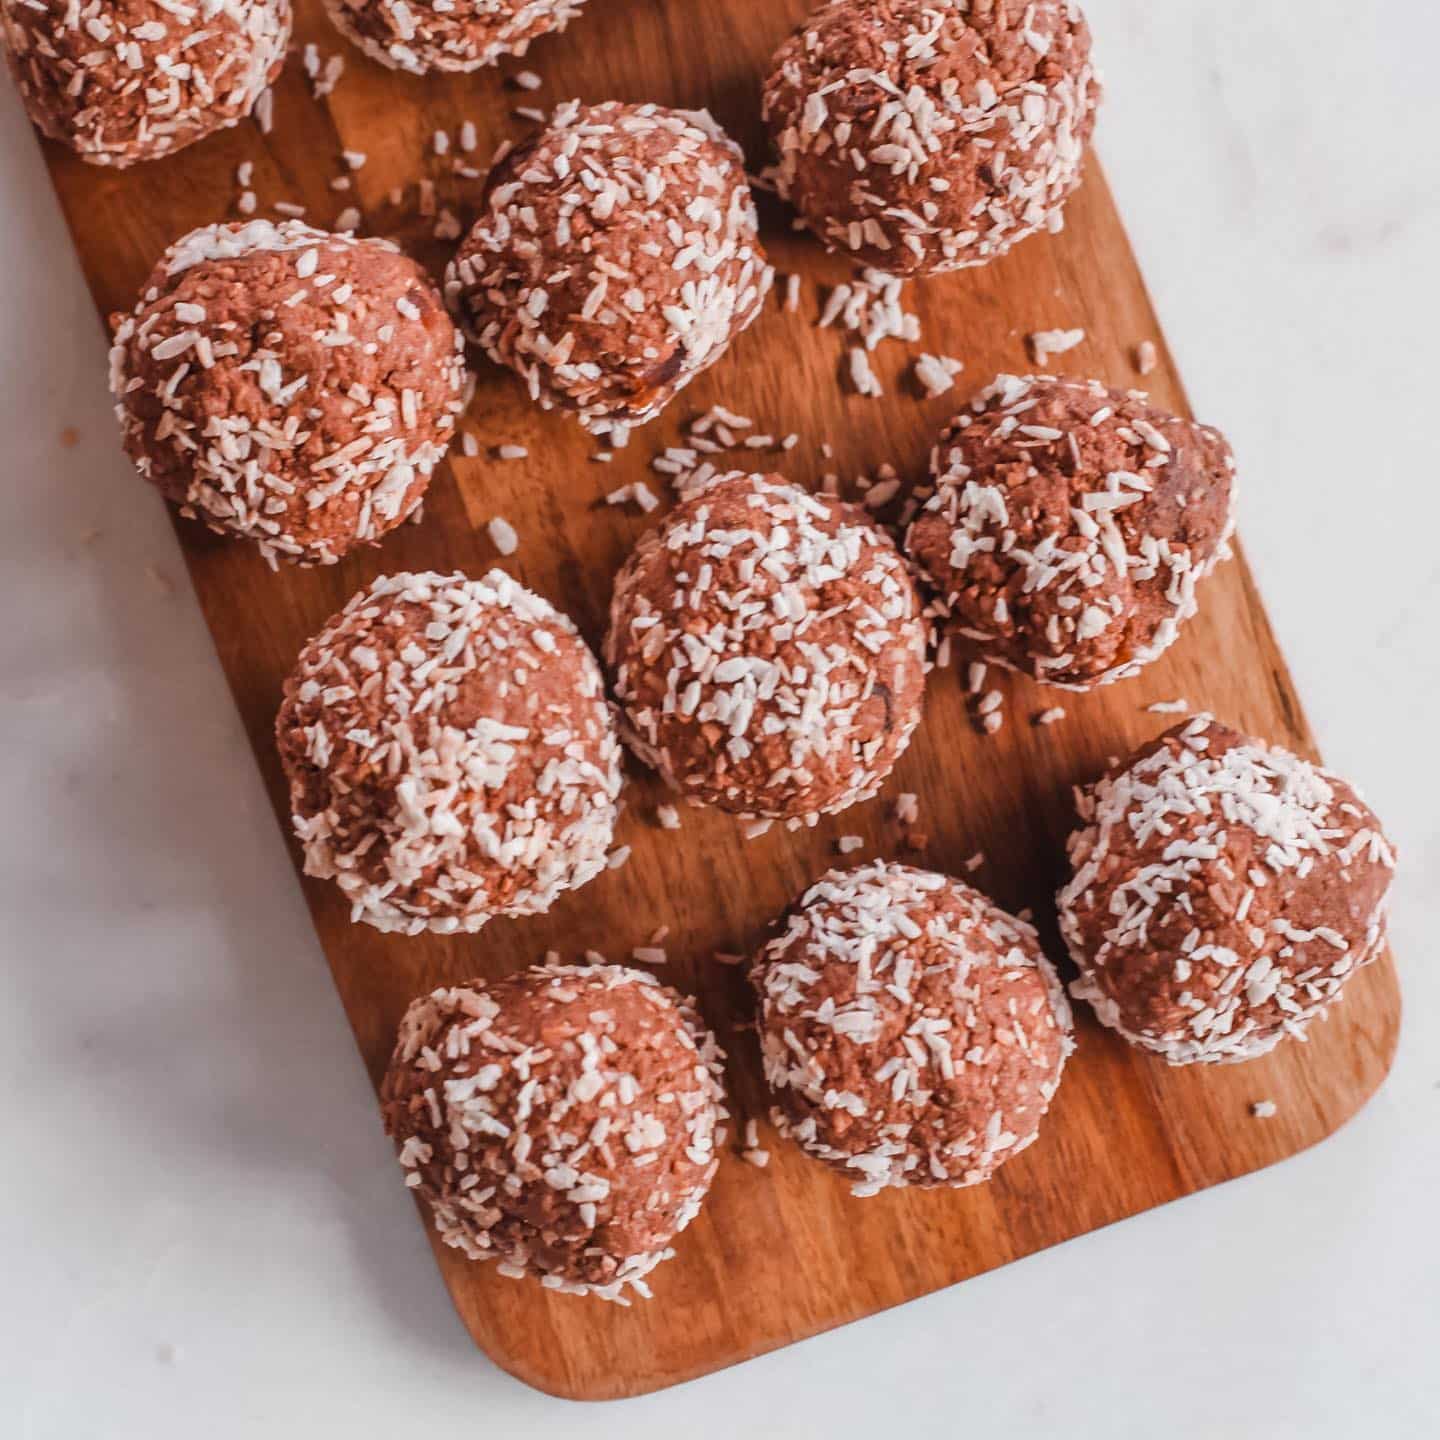 BROWNIE PROTEIN BLISS BALLS